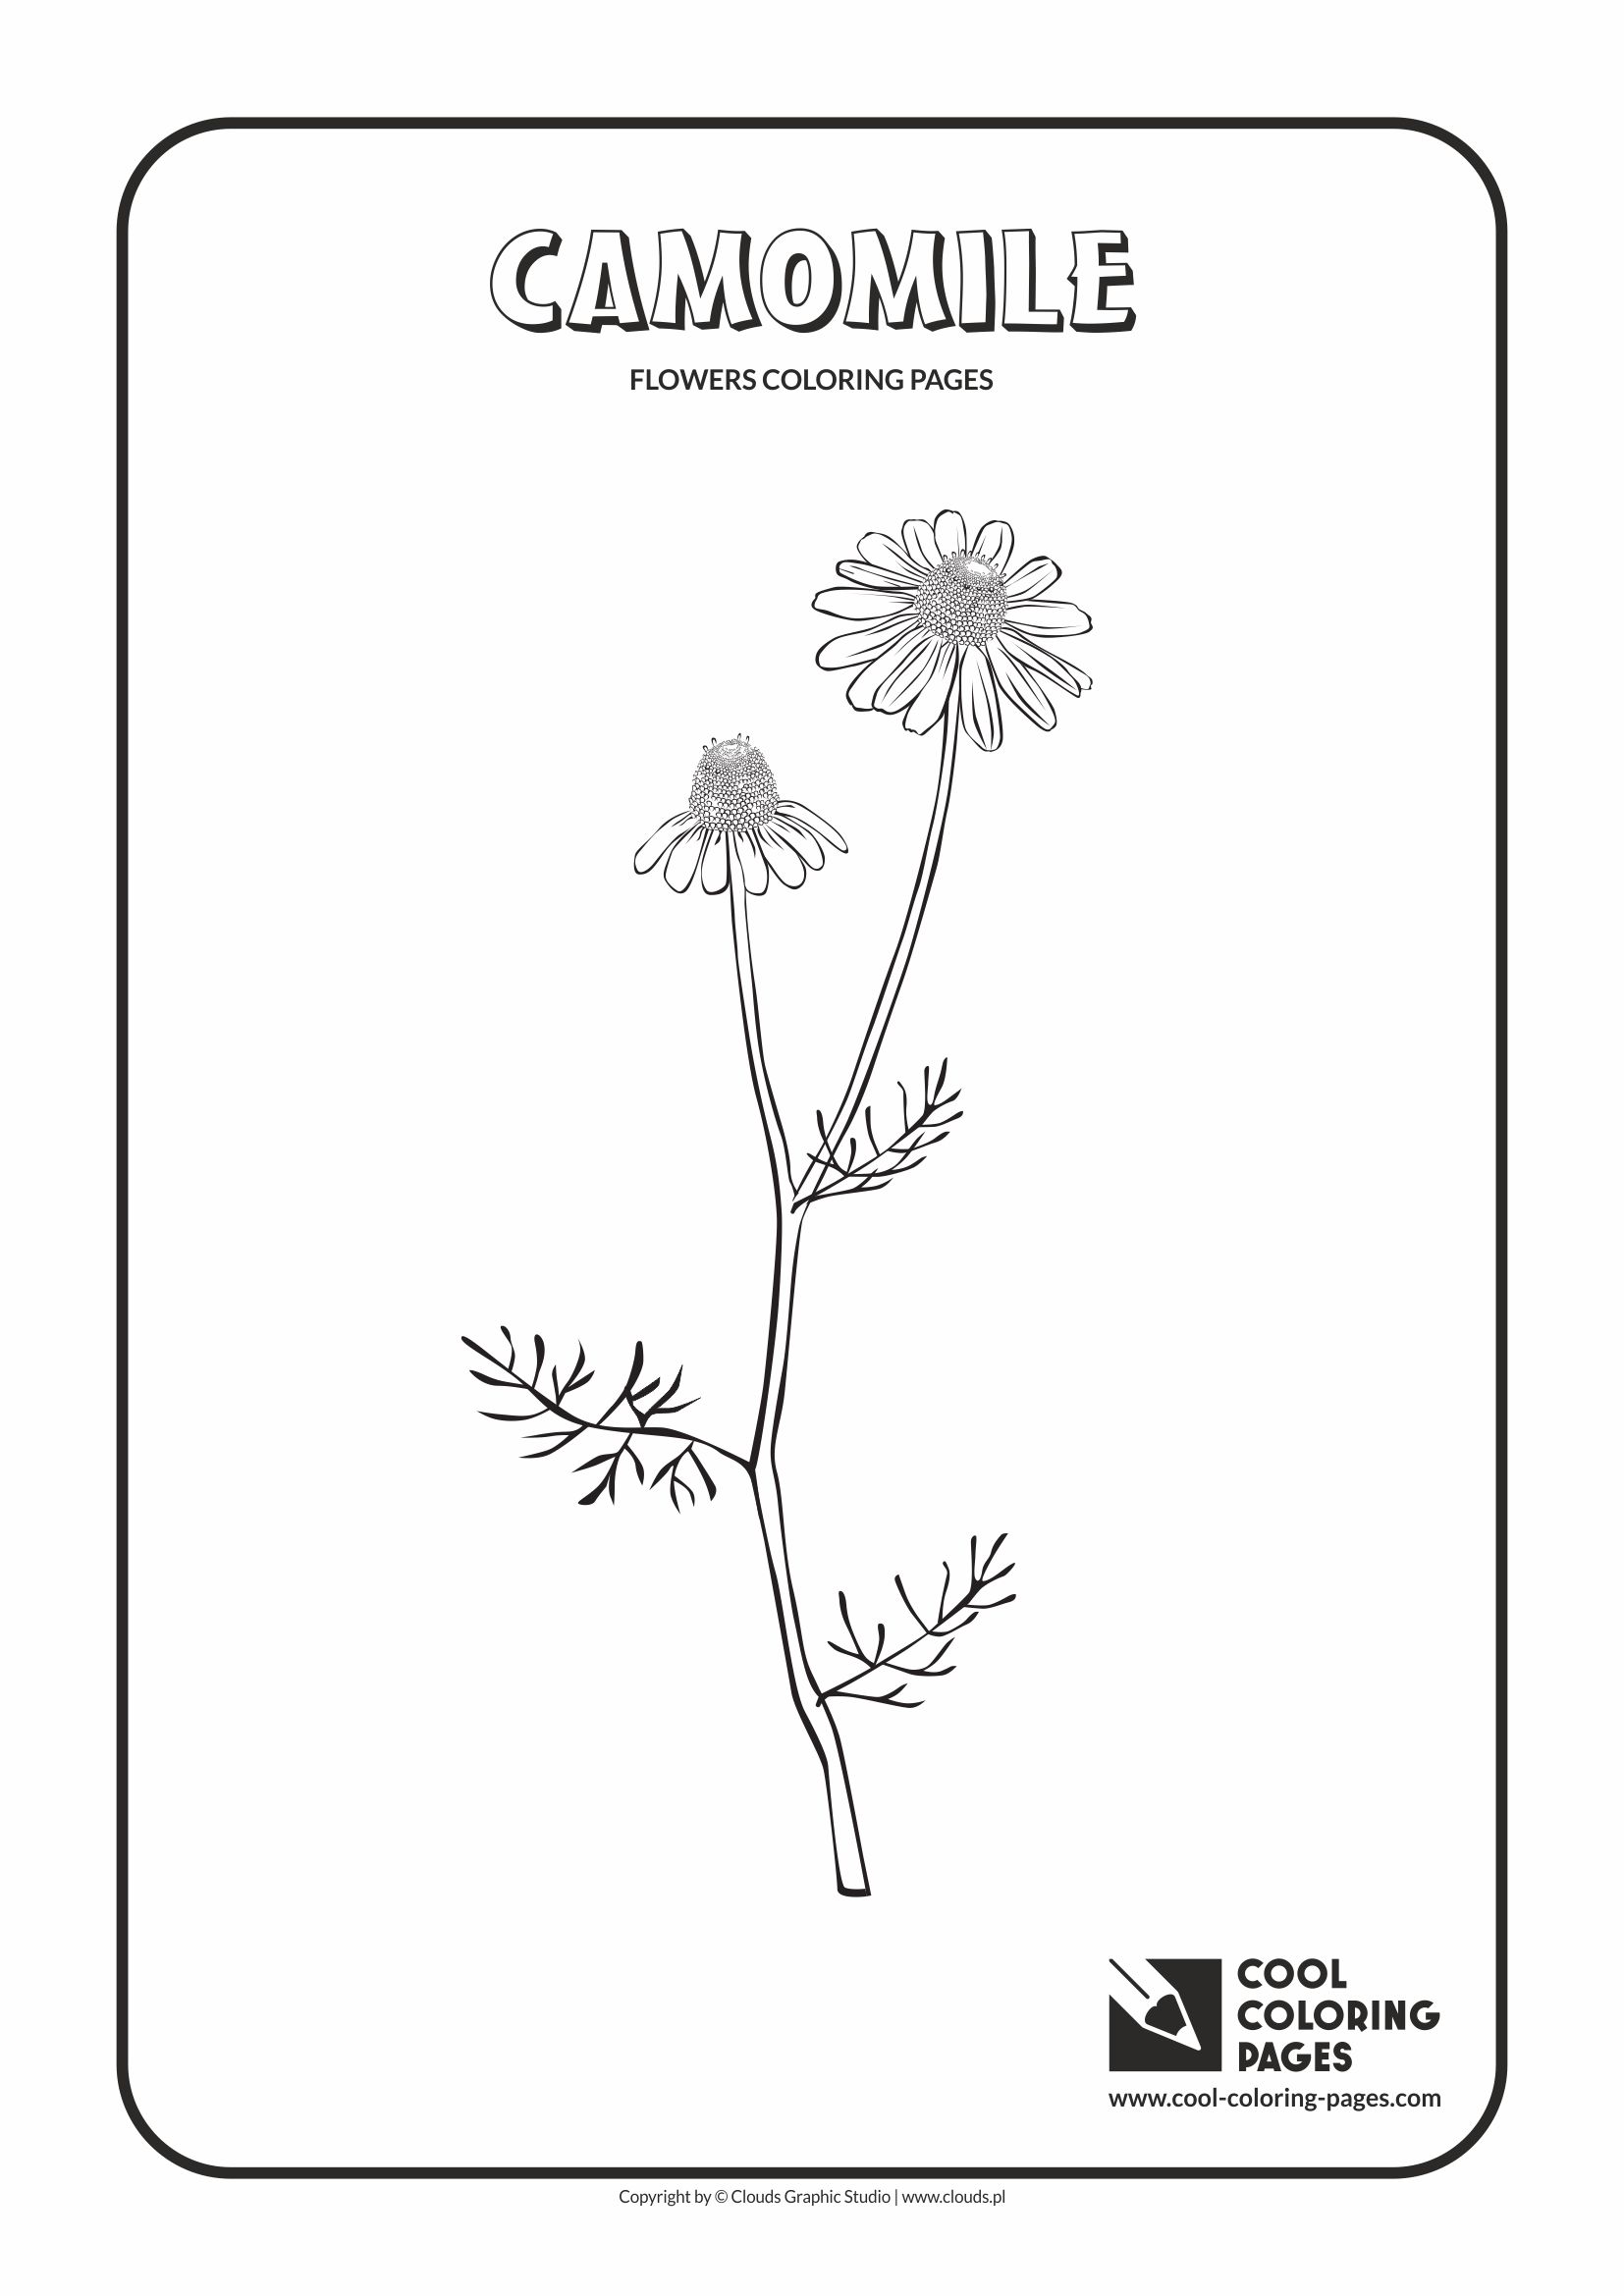 Cool Coloring Pages - Plants / Camomile / Coloring page with camomile